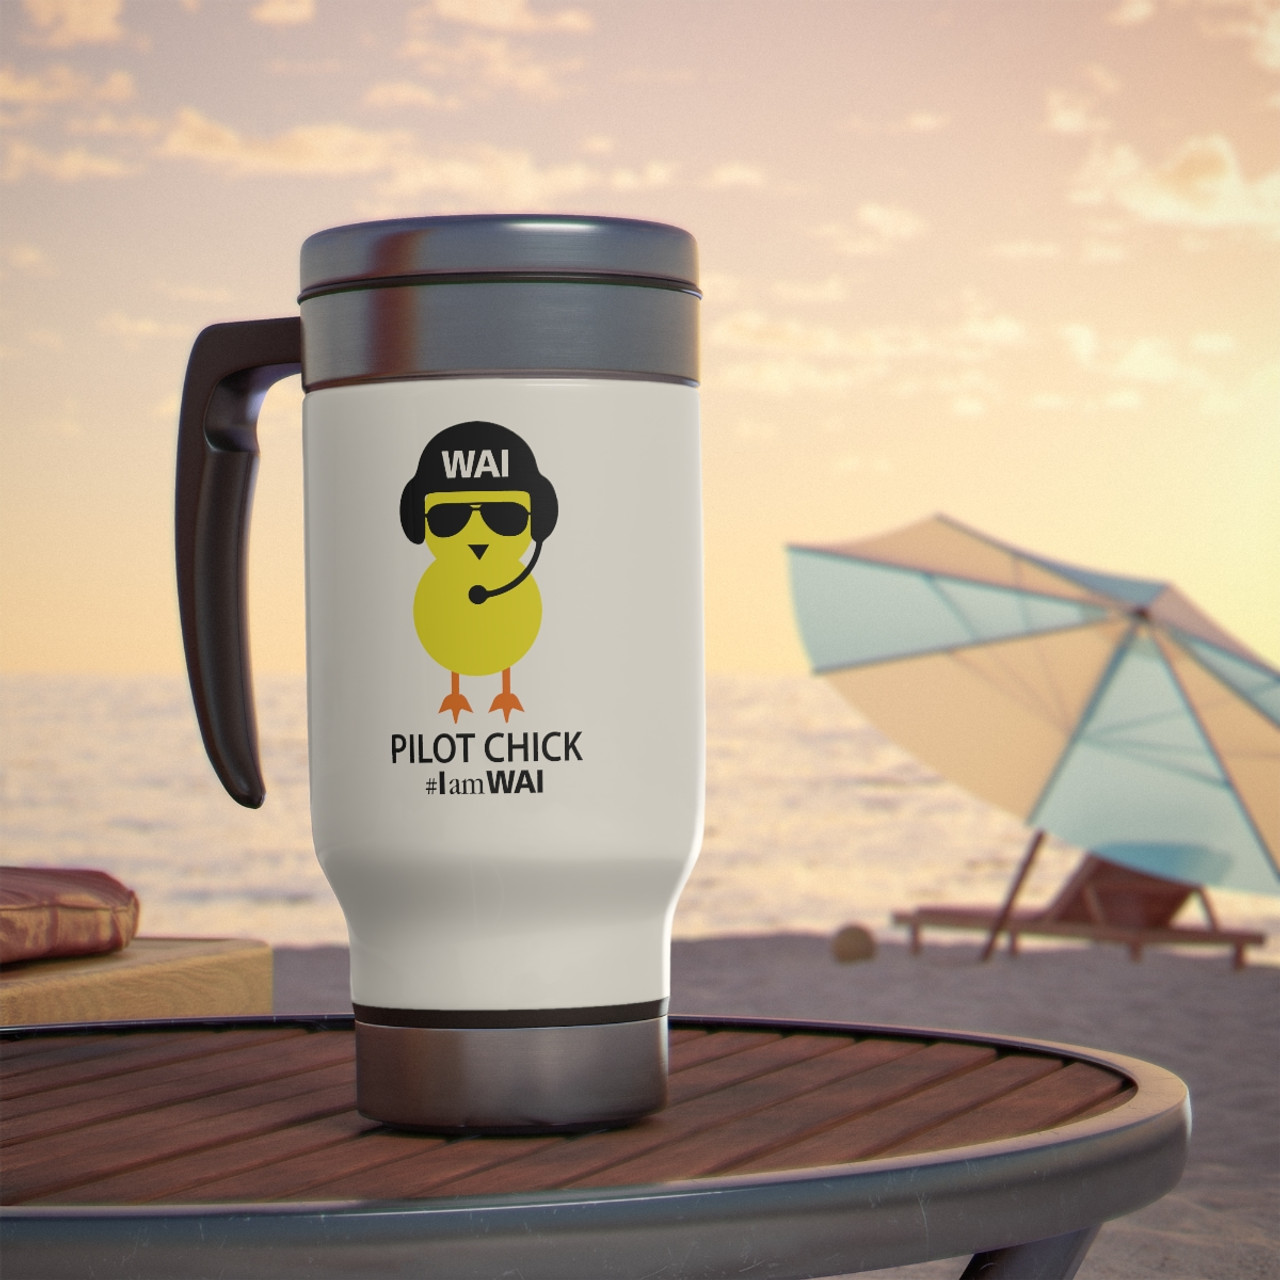 https://cdn11.bigcommerce.com/s-sqlllpksfp/images/stencil/1280x1280/products/188/694/14oz-pilot-chick-stainless-steel-travel-mug-with-handle__64235.1683557804.jpg?c=1?imbypass=on